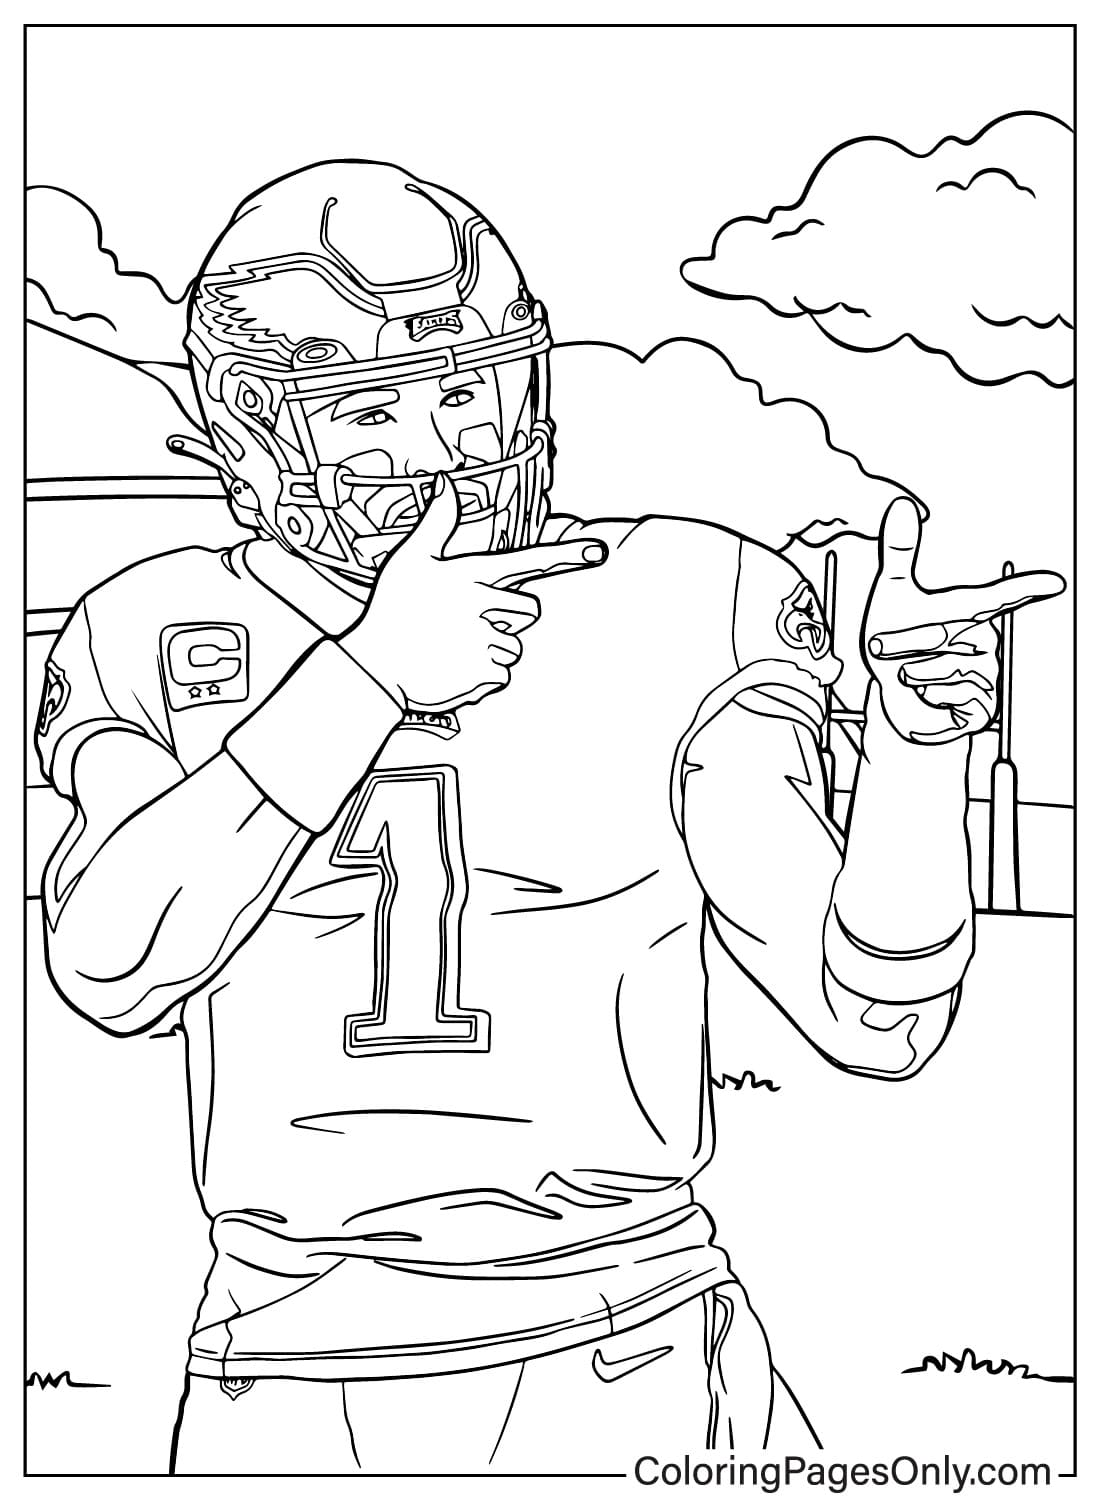 Jalen Hurts Coloring Page Free from Philadelphia Eagles